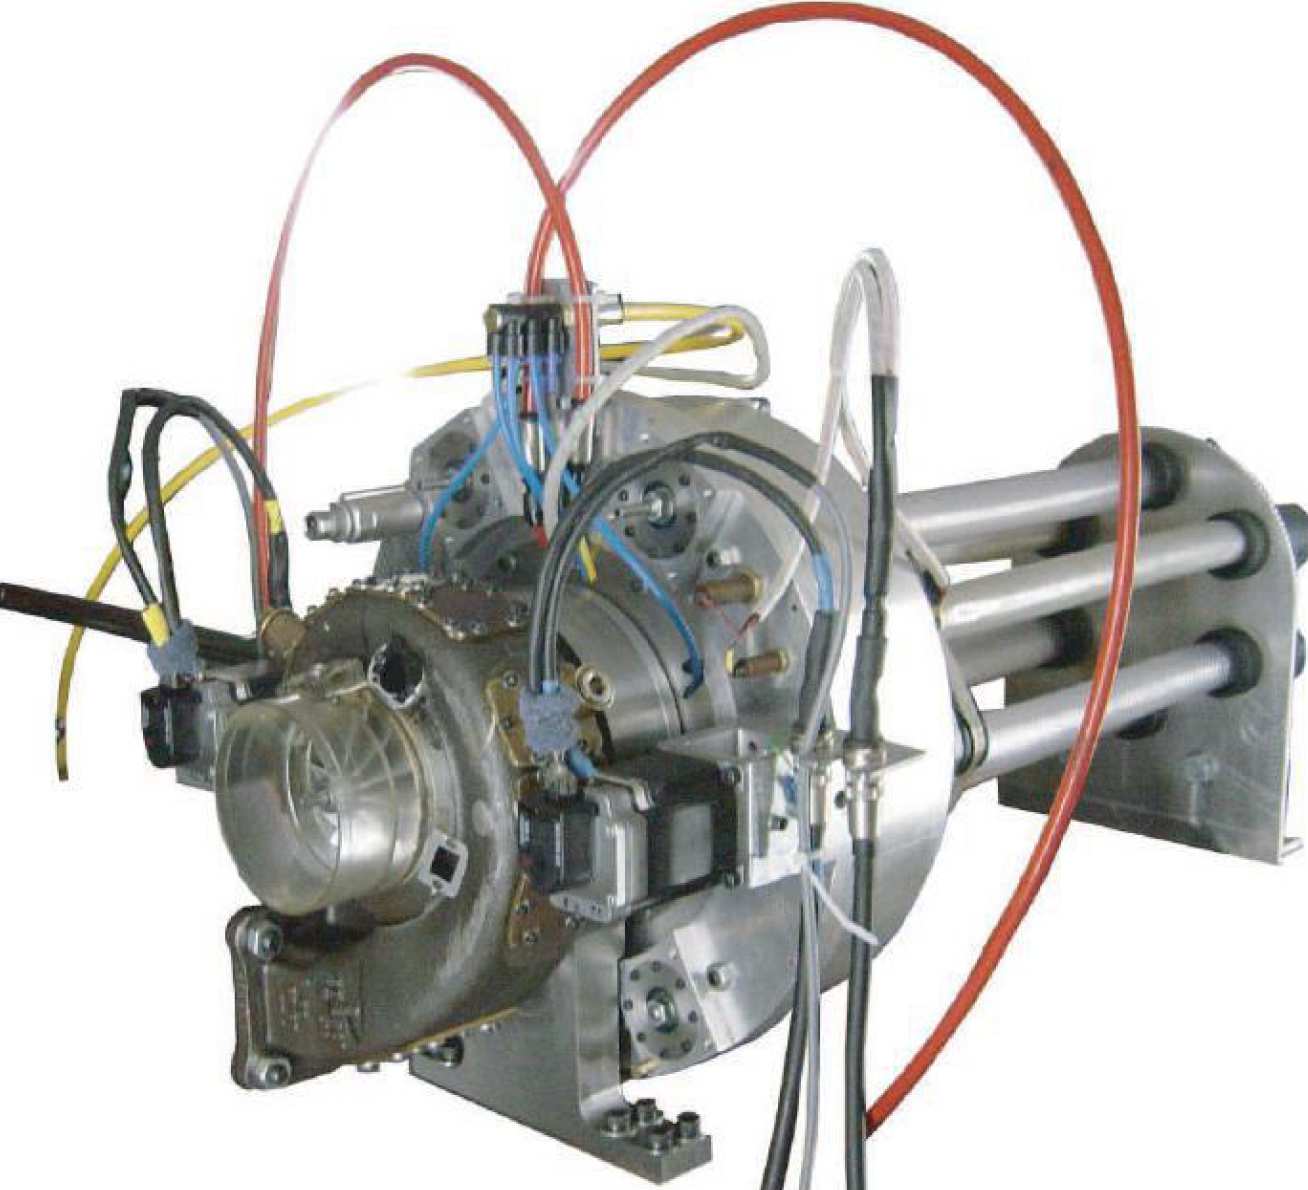 Front view eddy-current dynamometer